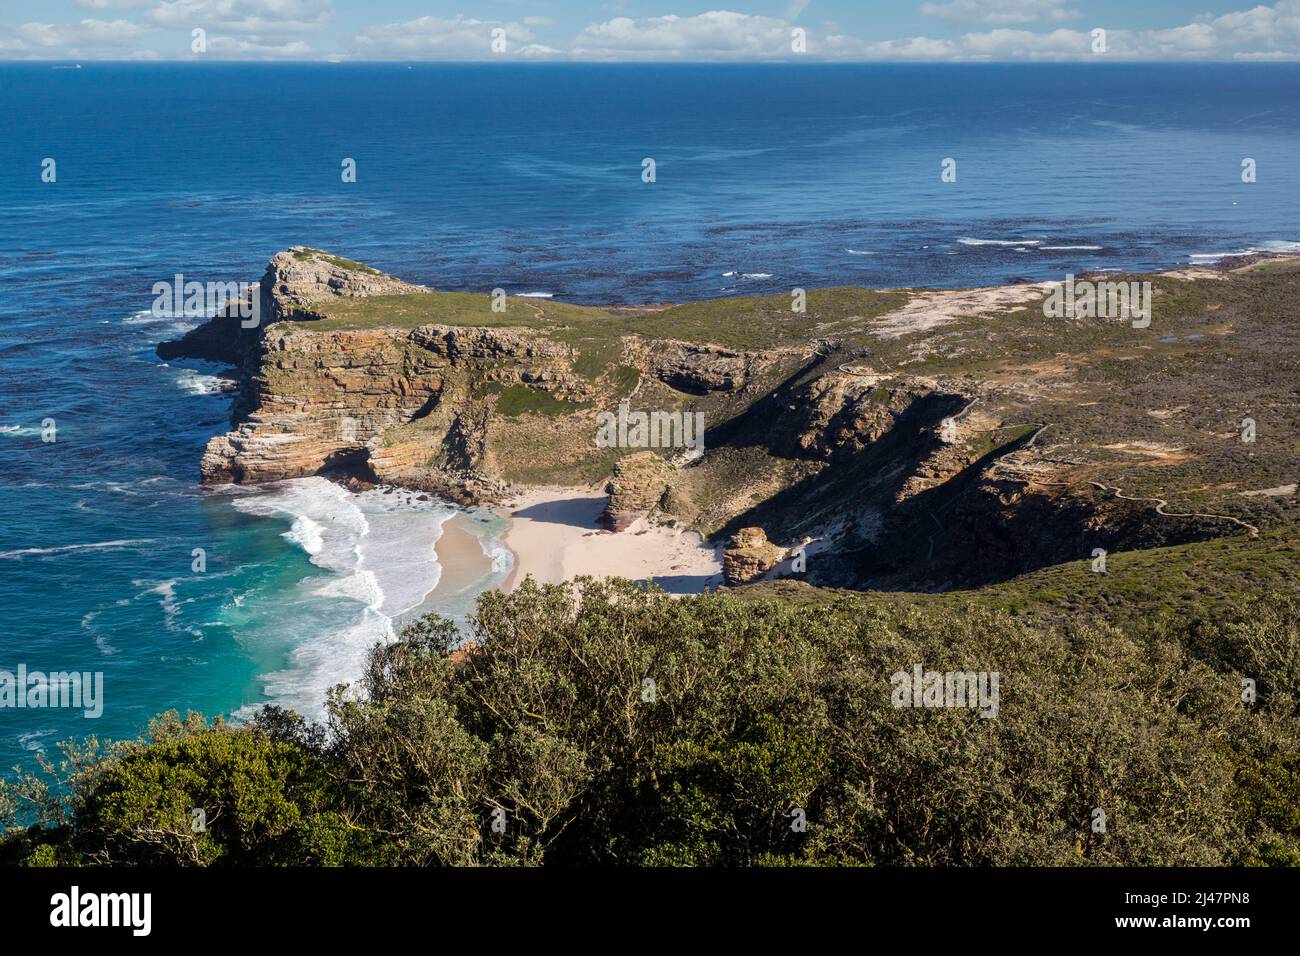 South Africa.  Cape of Good Hope, Atlantic Ocean, seen from Cape Point.  Note hiking trail leading to Cape of Good Hope. Stock Photo